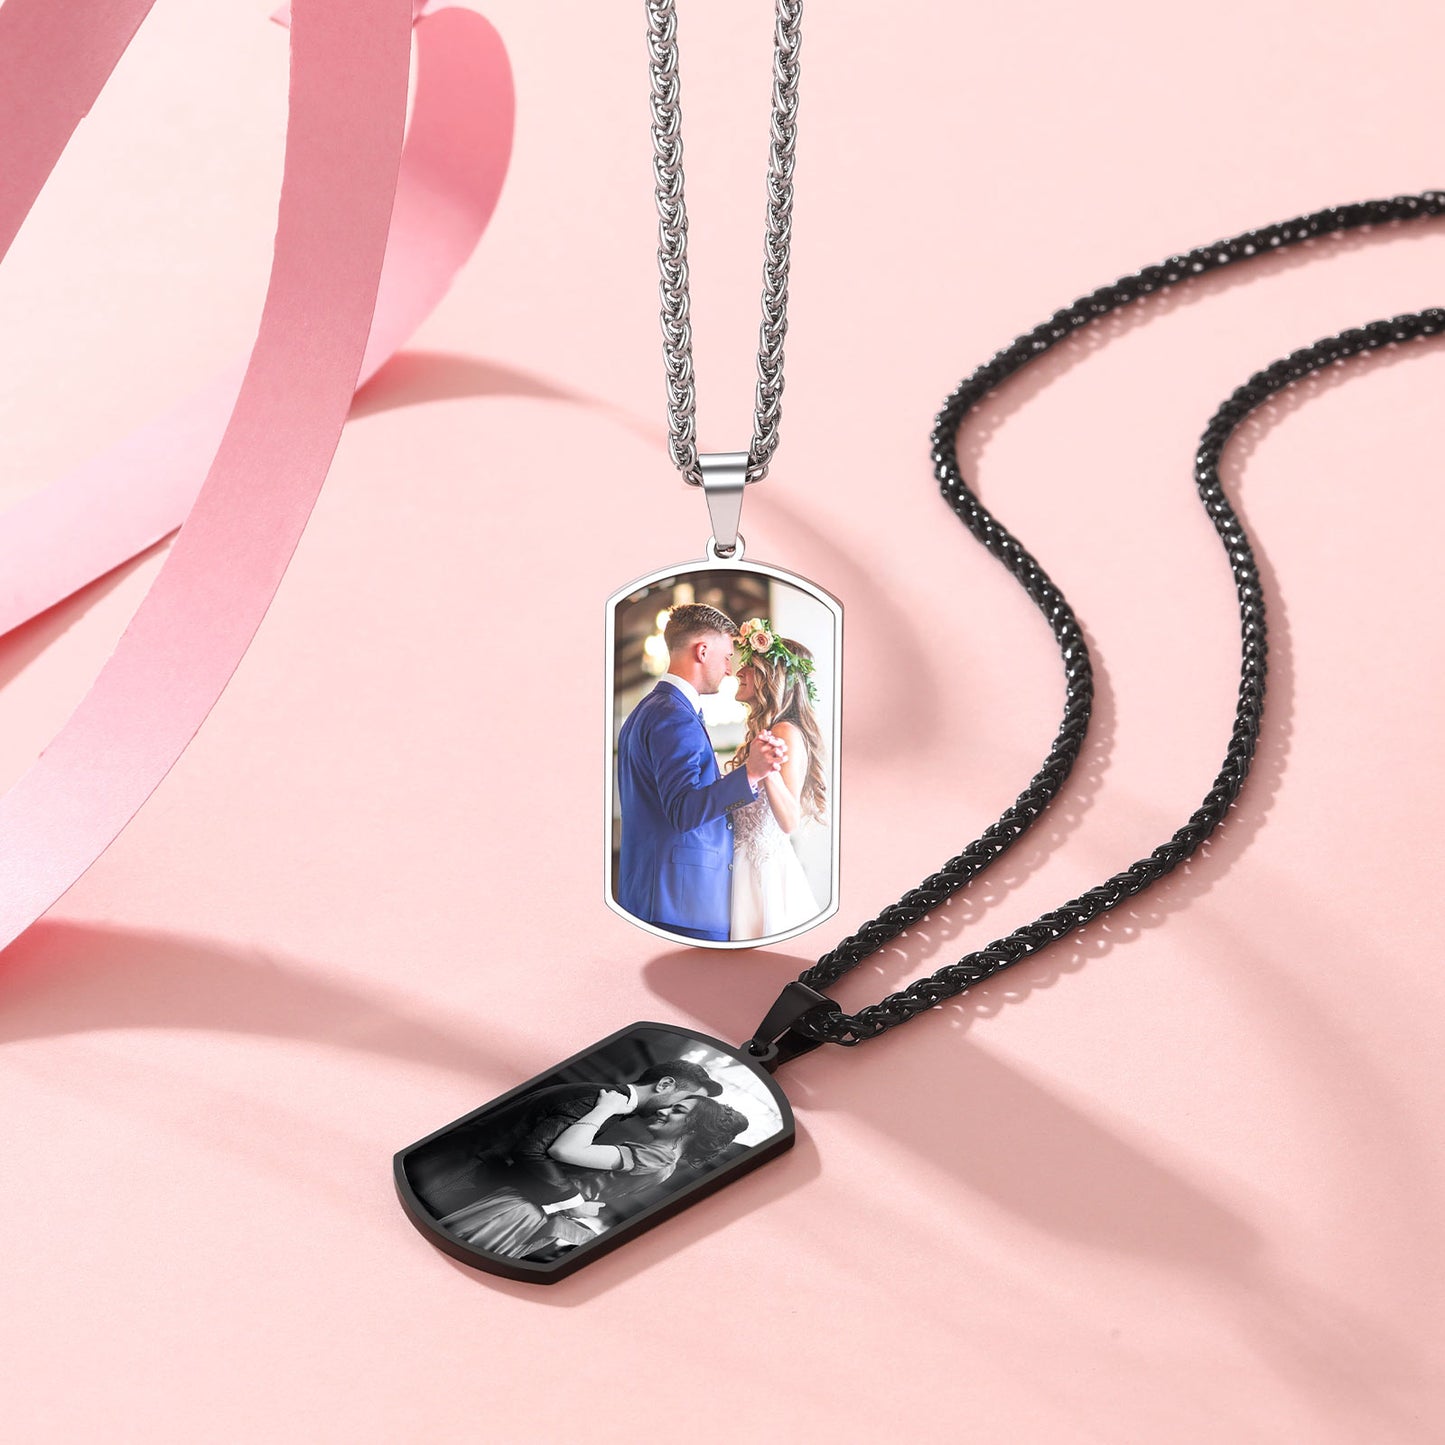 Personalized Dog Tag Picture Necklace for Men Women